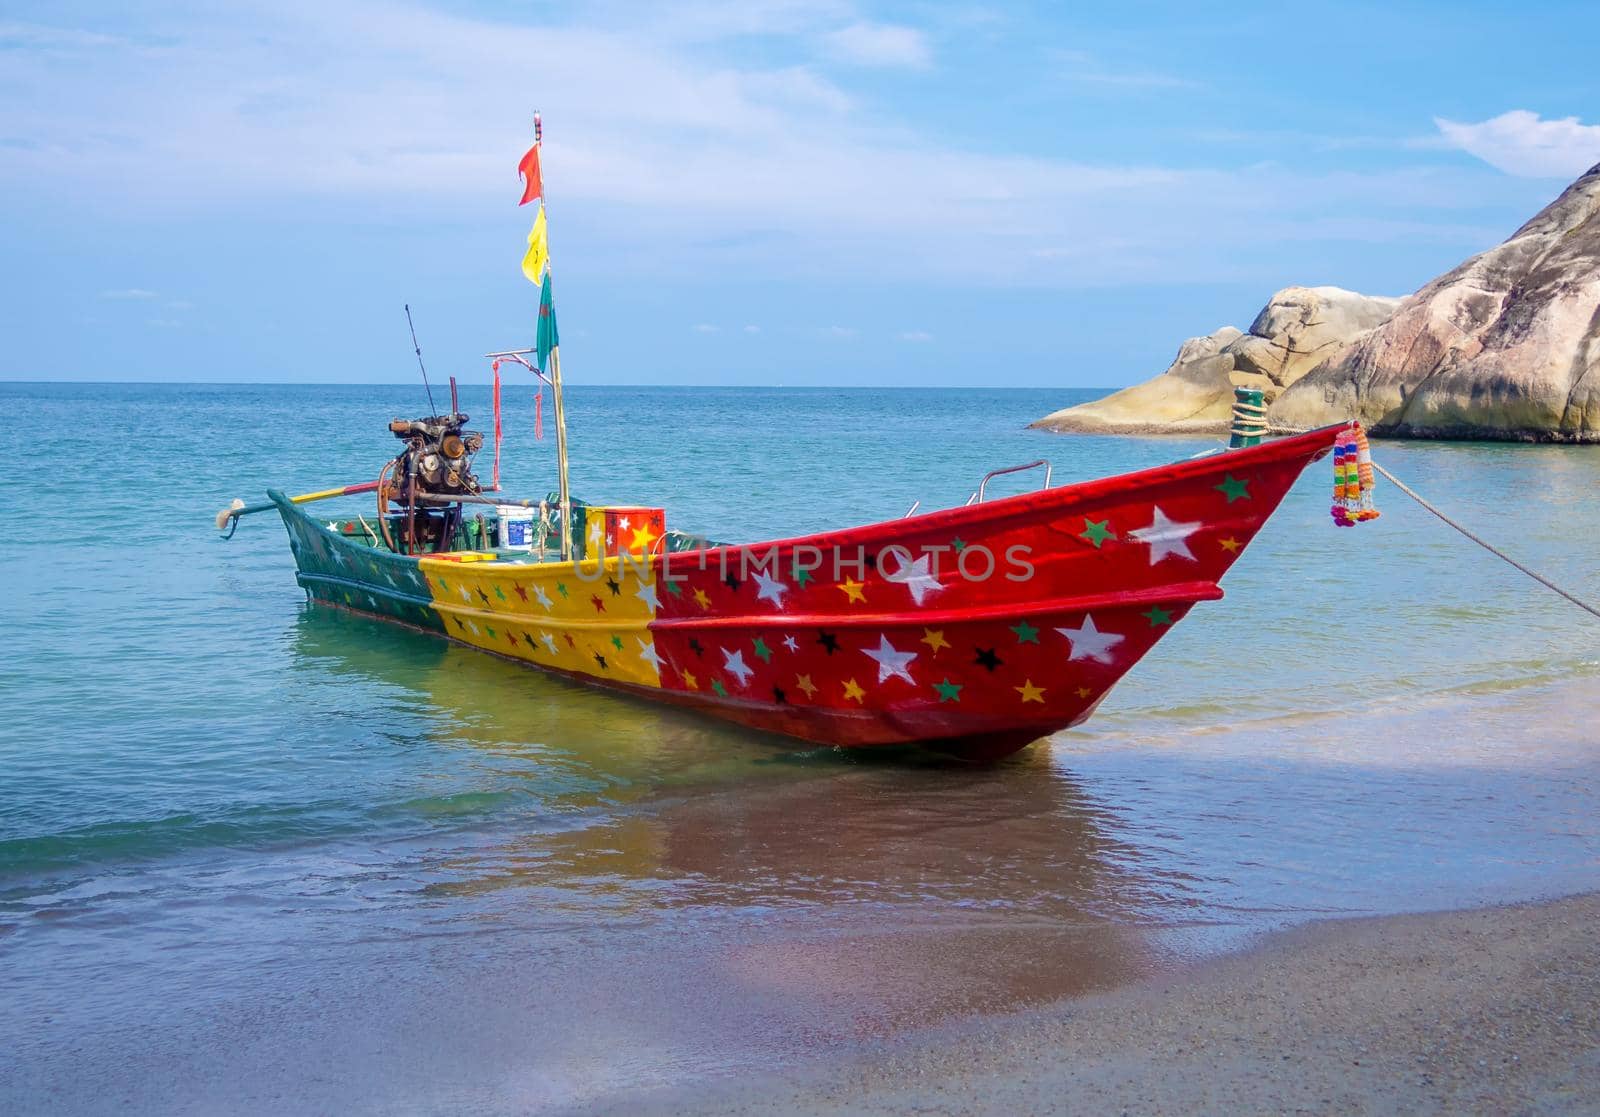 Tropical beach, traditional long tail boats, Gulf of Thailand, Thailand by Andre1ns